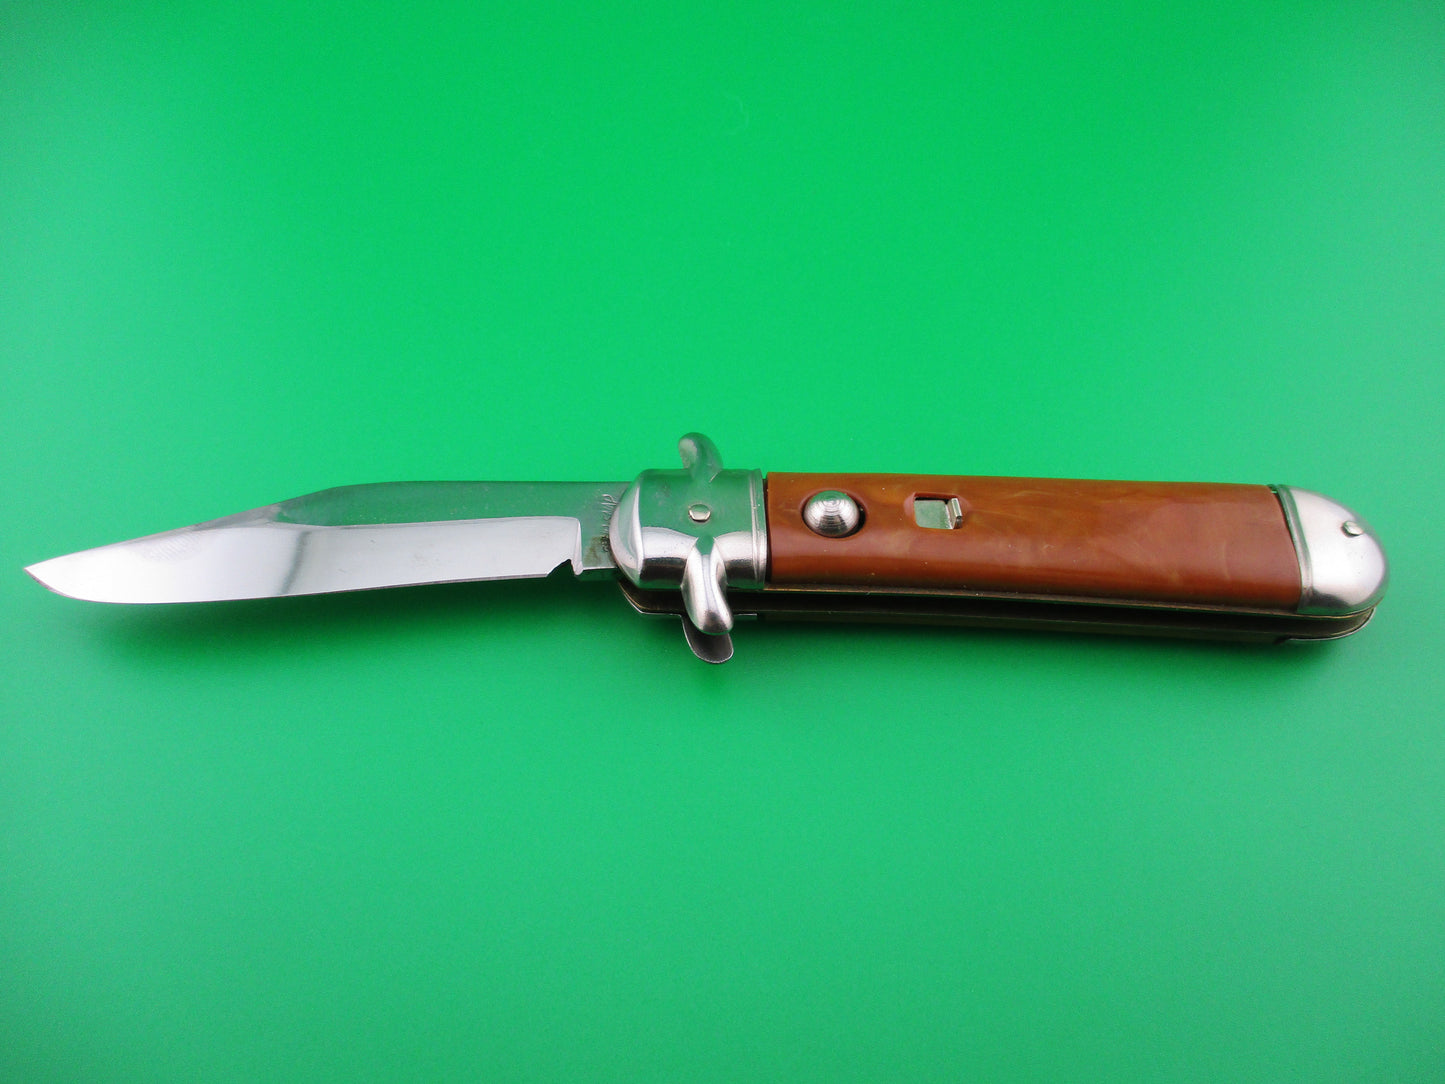 Colonial SHUR-SNAP Stubby Fatjack switchblade knife